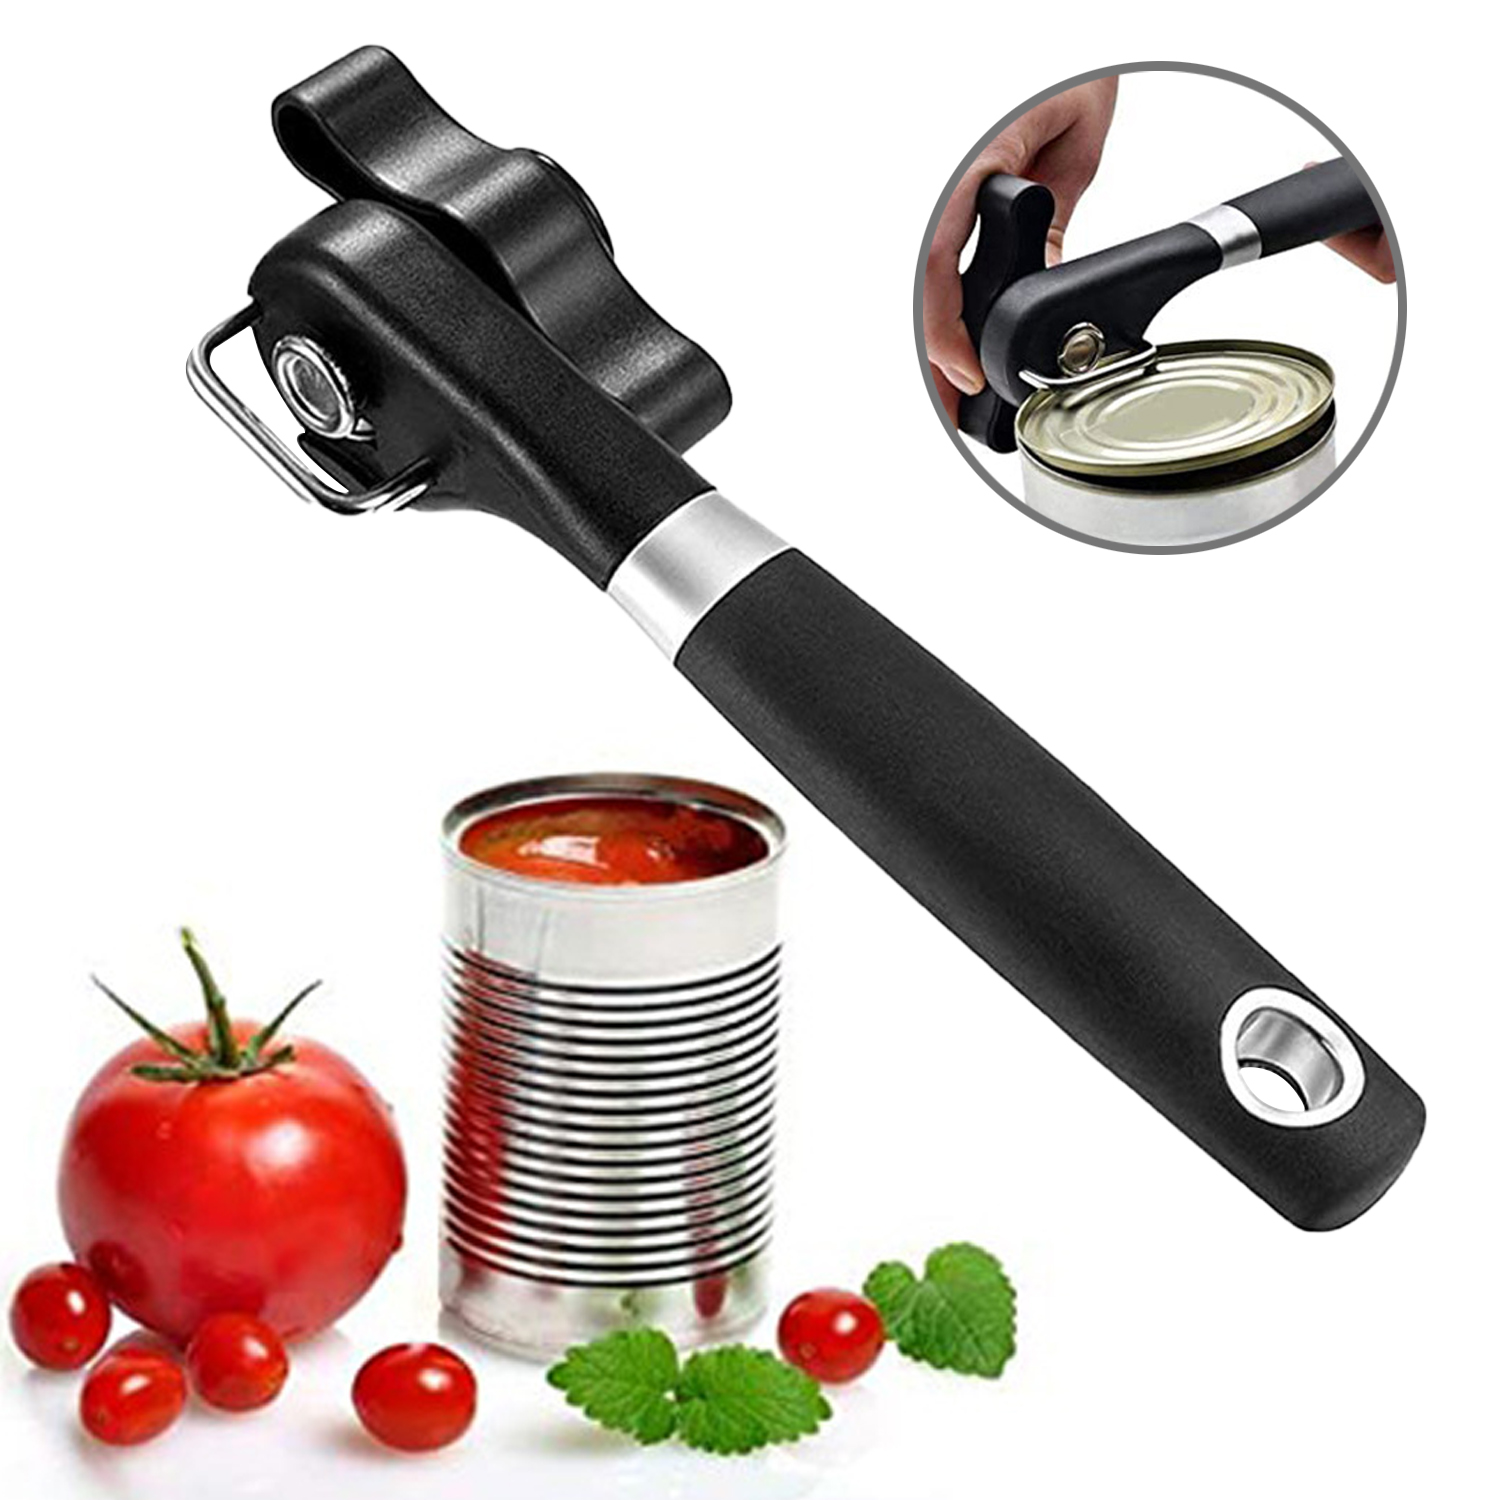 Can Opener Smooth Edge Safe Cut Can Opener Handheld with Ergonomics Design No Sharp Edges Can Bottle Opener Kitchen Safety Manual Can Opener